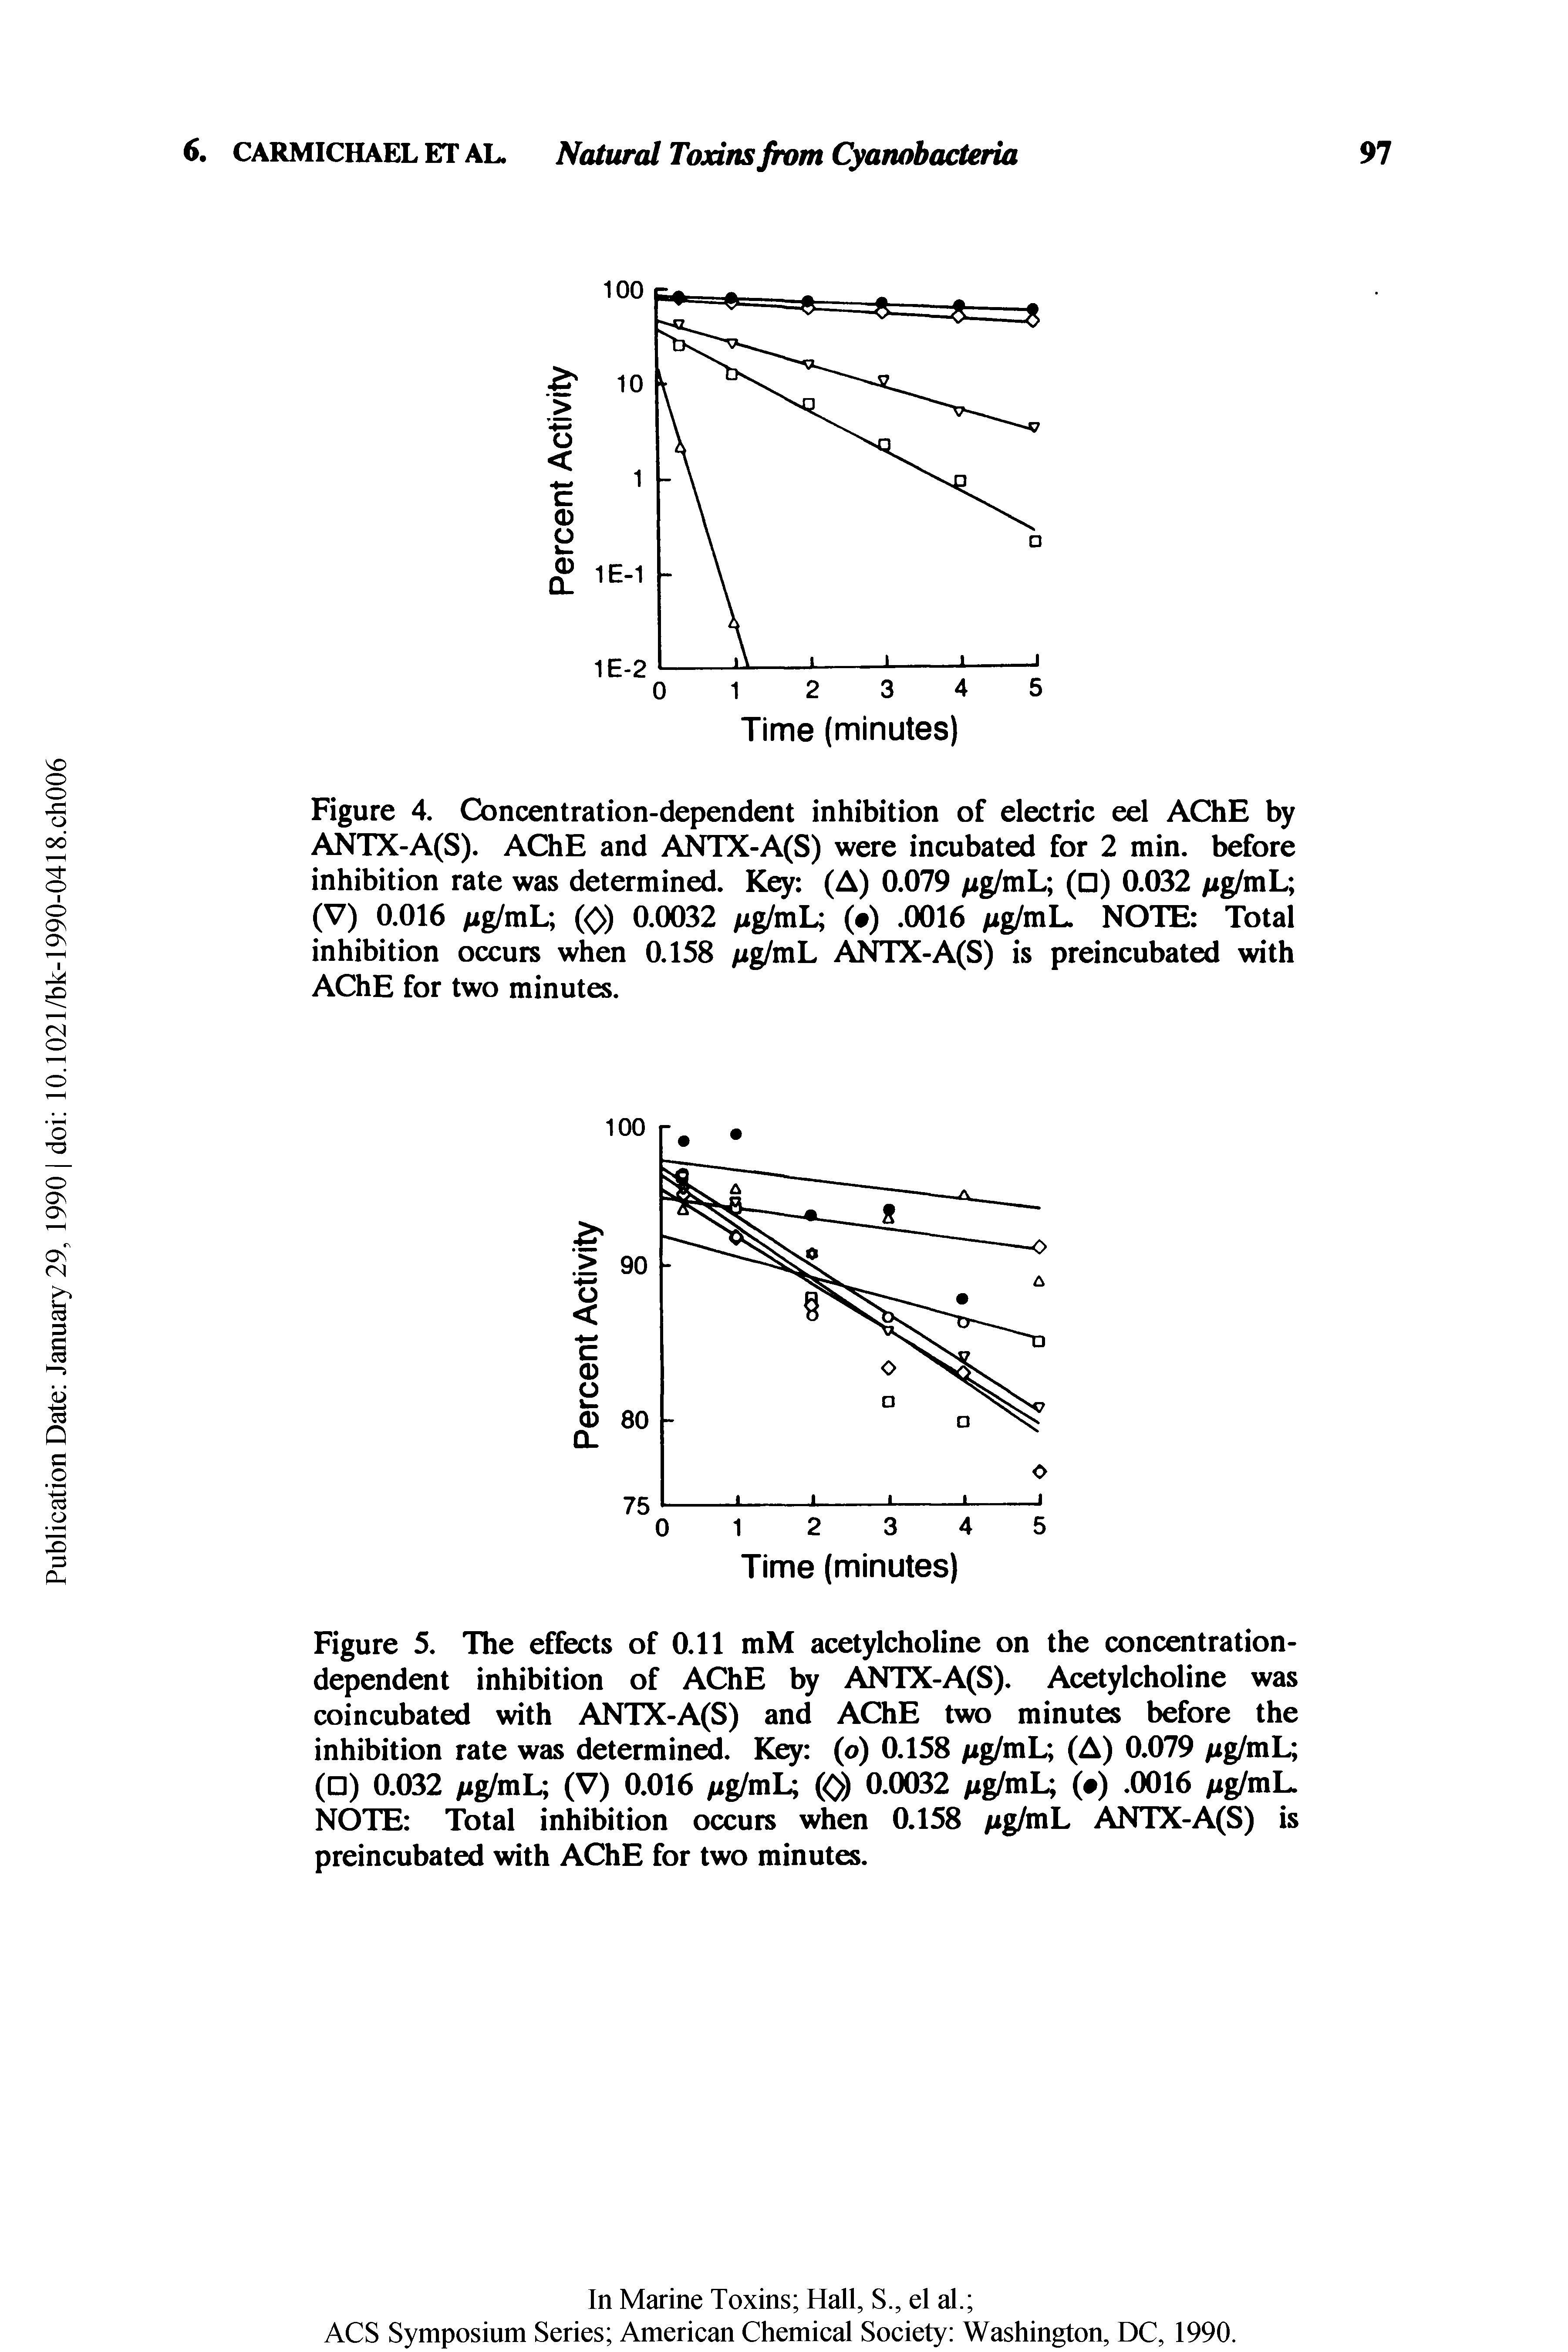 Figure 4. Concentration-dependent inhibition of electric eel AChE by ANTX-A(S). AChE and AhTrX-A(S) were incubated for 2 min. before inhibition rate was determined. Key (A) 0.079 ixg/mL ( ) 0.032 xg/mL (V) 0.016 lig/mL >) 0.0032 ig/mL ( ). 0016 tigjmL. NOTE Total inhibition occurs when 0.158 tiglmL ANTX-A(S) is preincubated with AChE for two minutes.